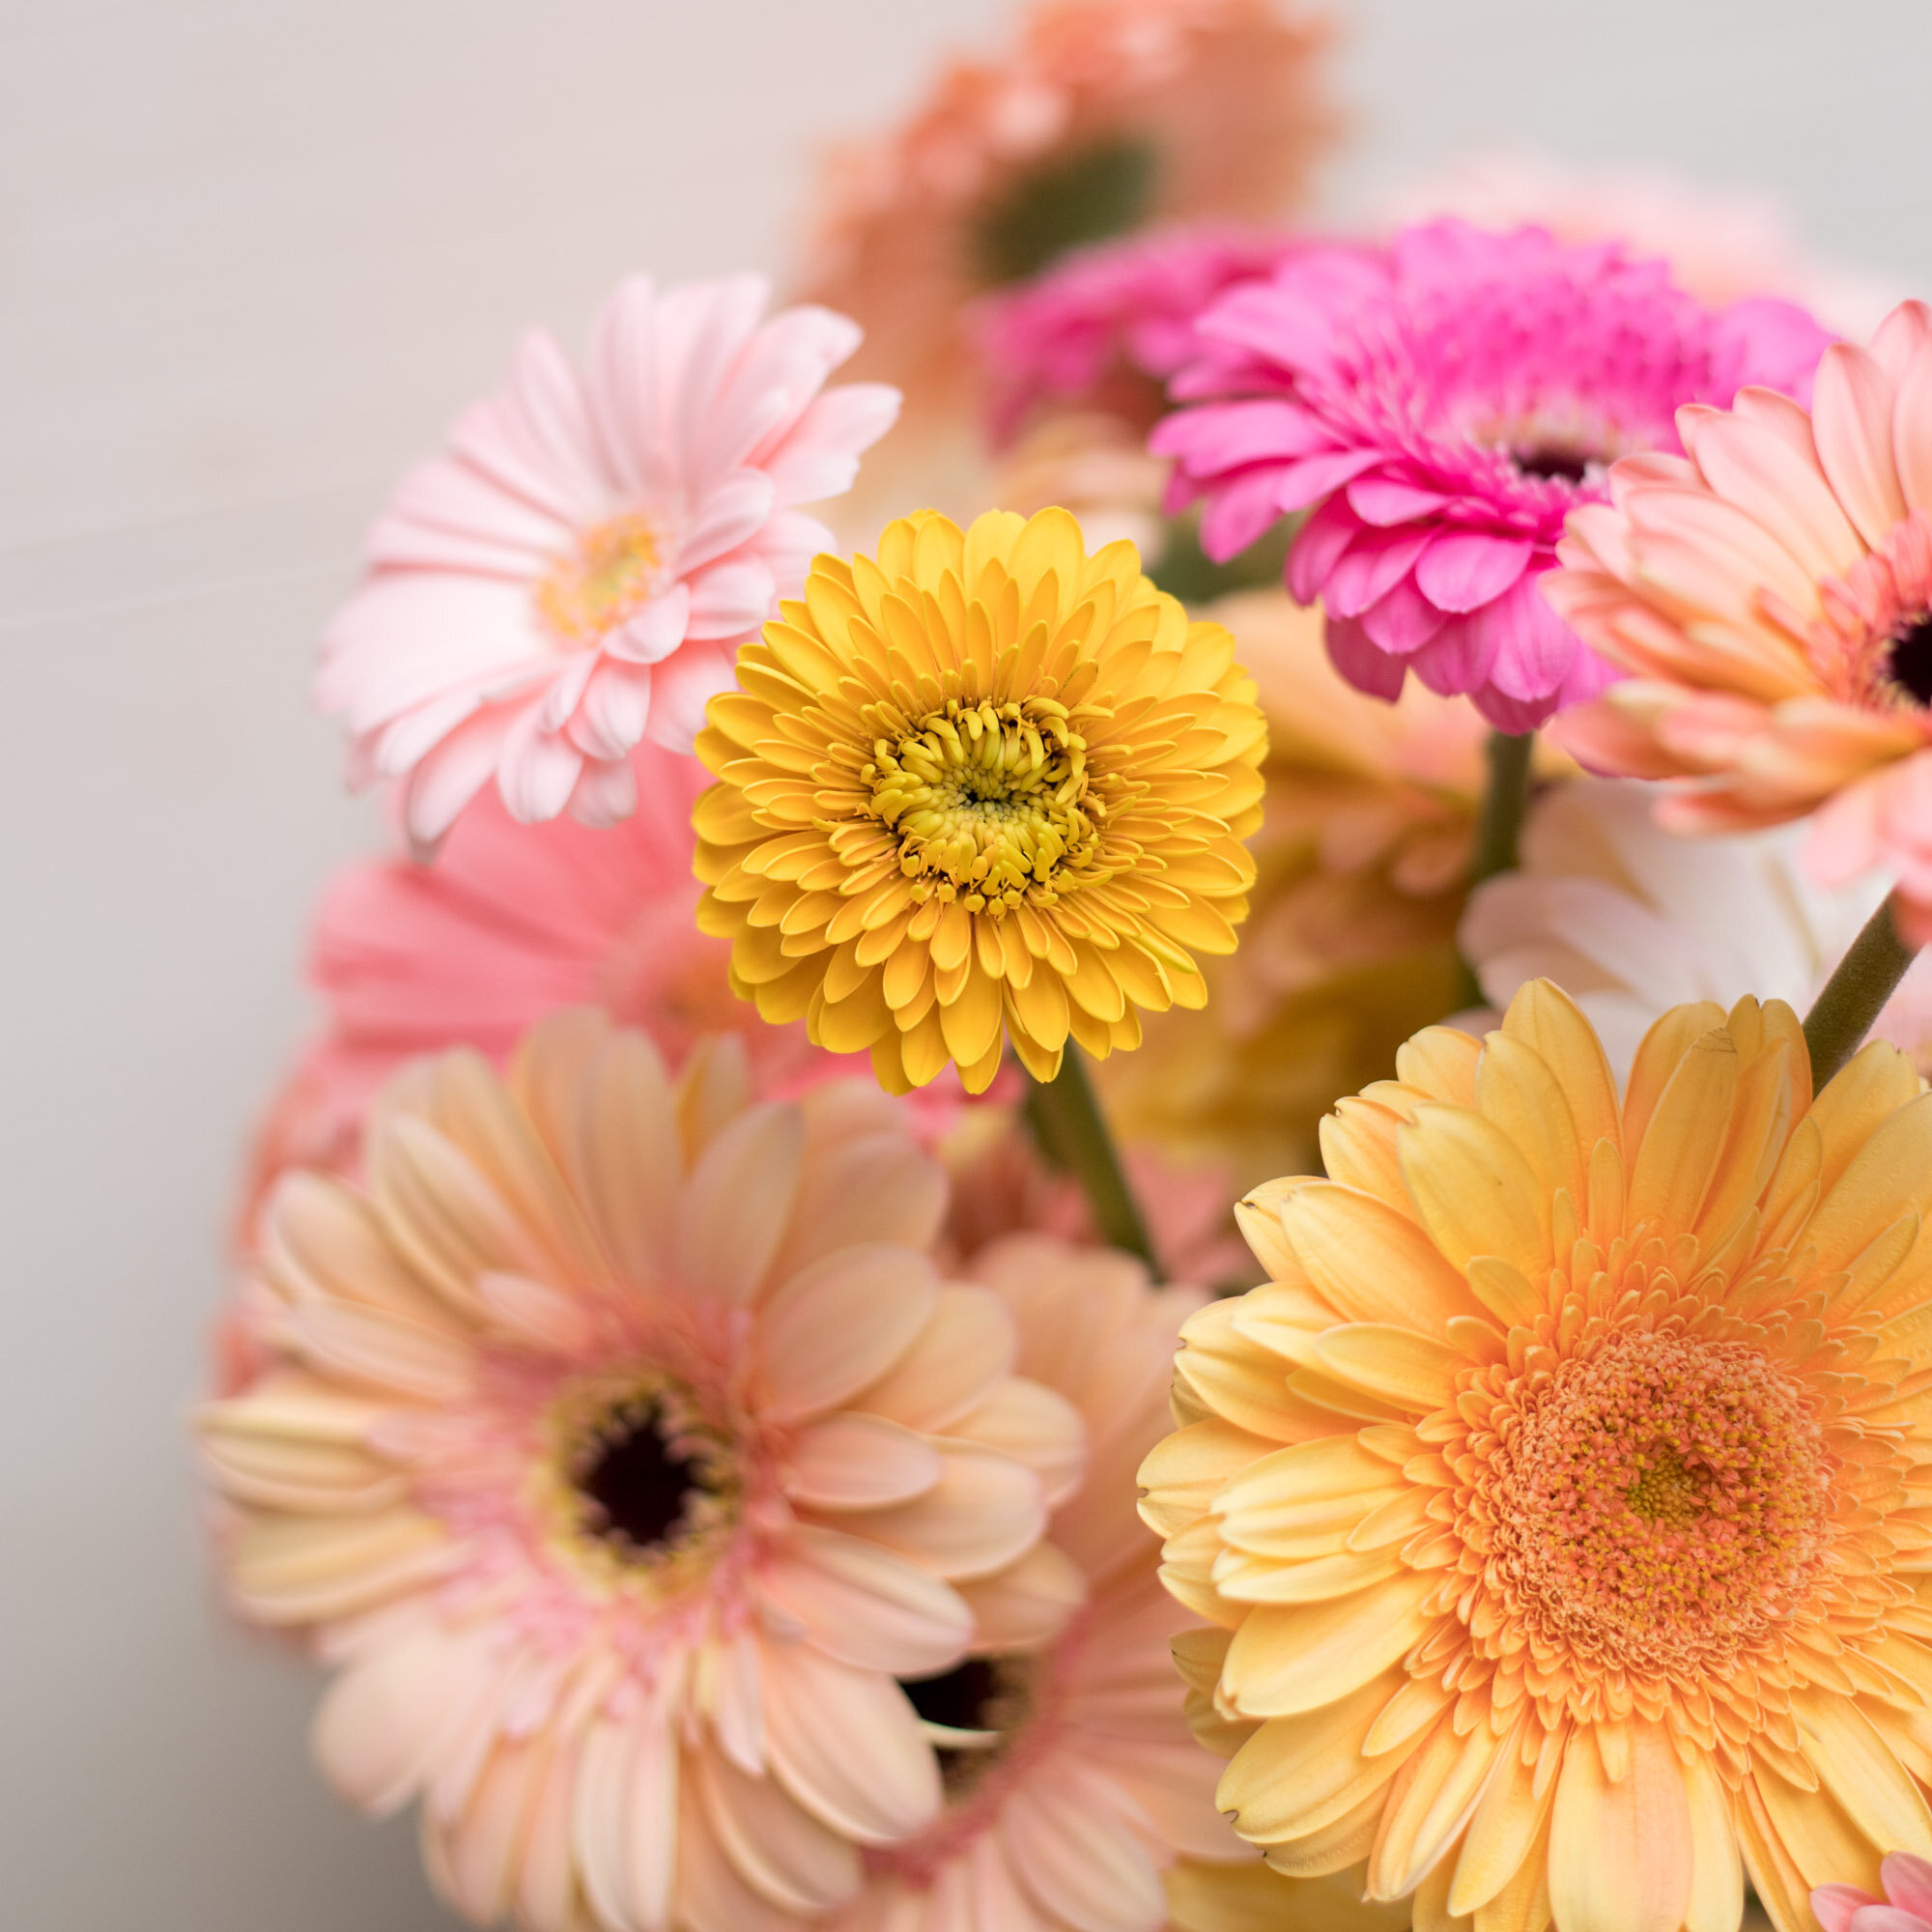 A close up of pink, peach, and yellow daisies